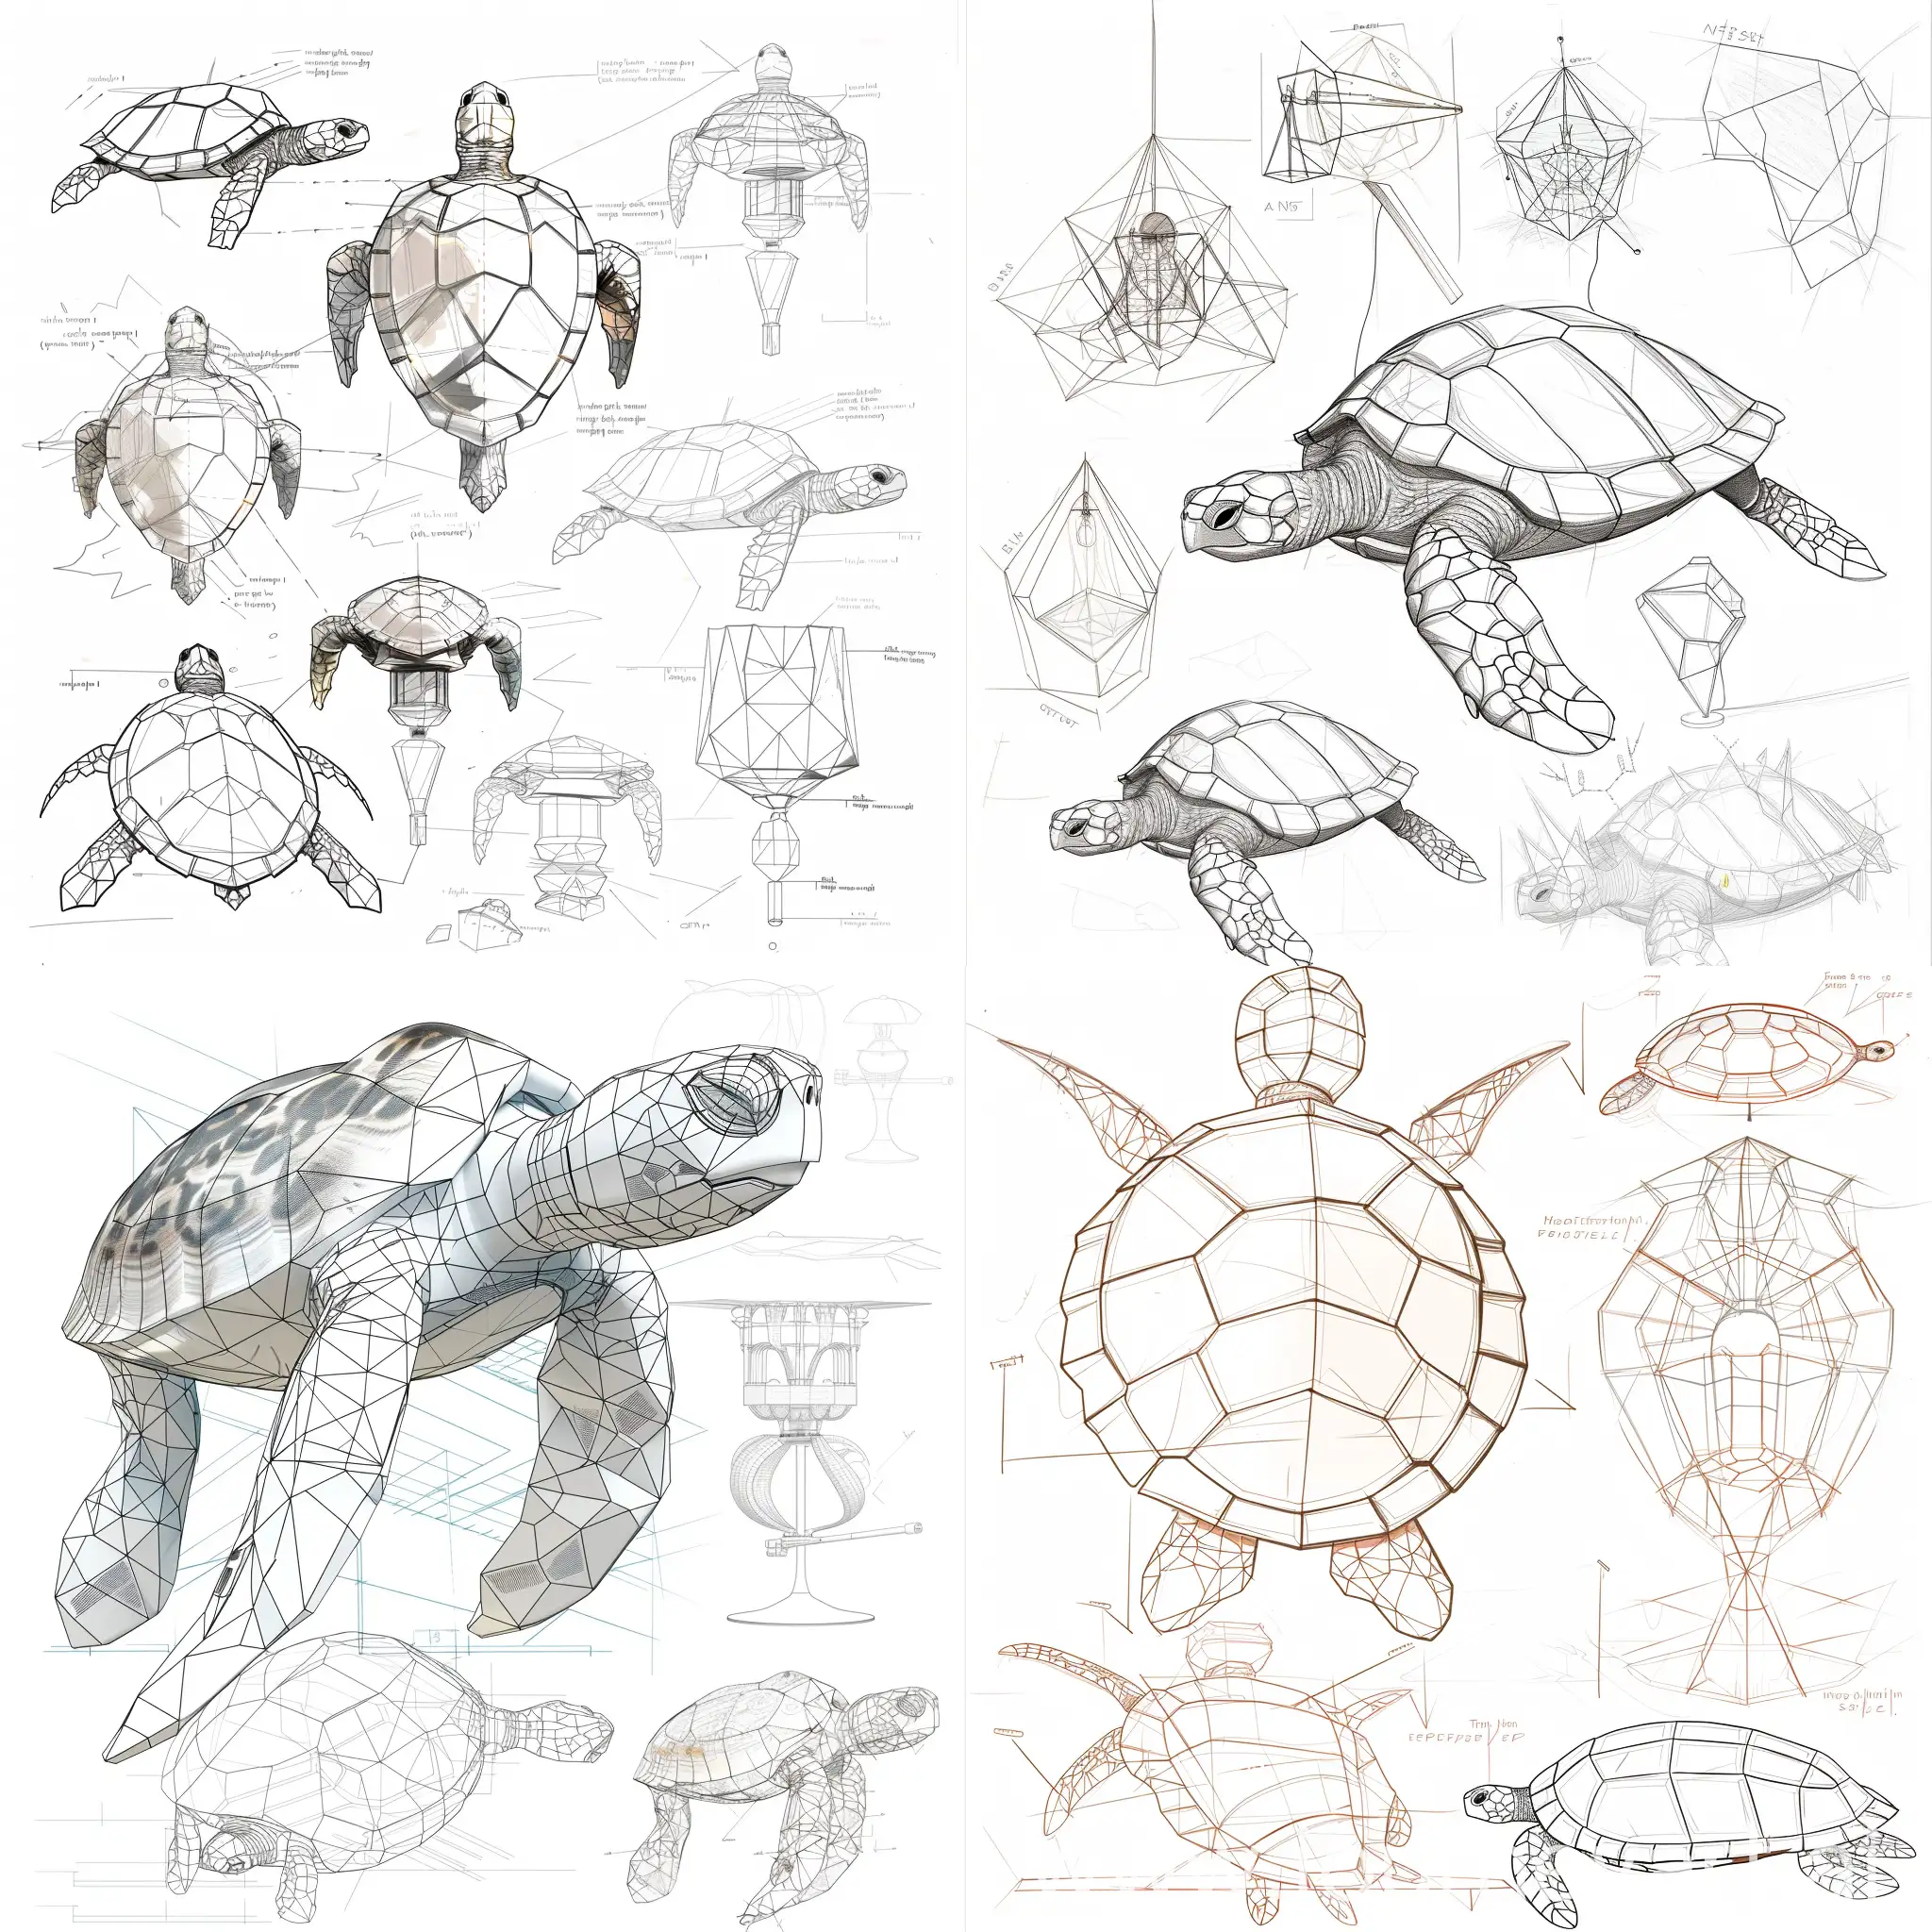 HandDrawn-Lamp-Design-Sketch-Turtle-Shape-Extraction-and-Geometric-Elements